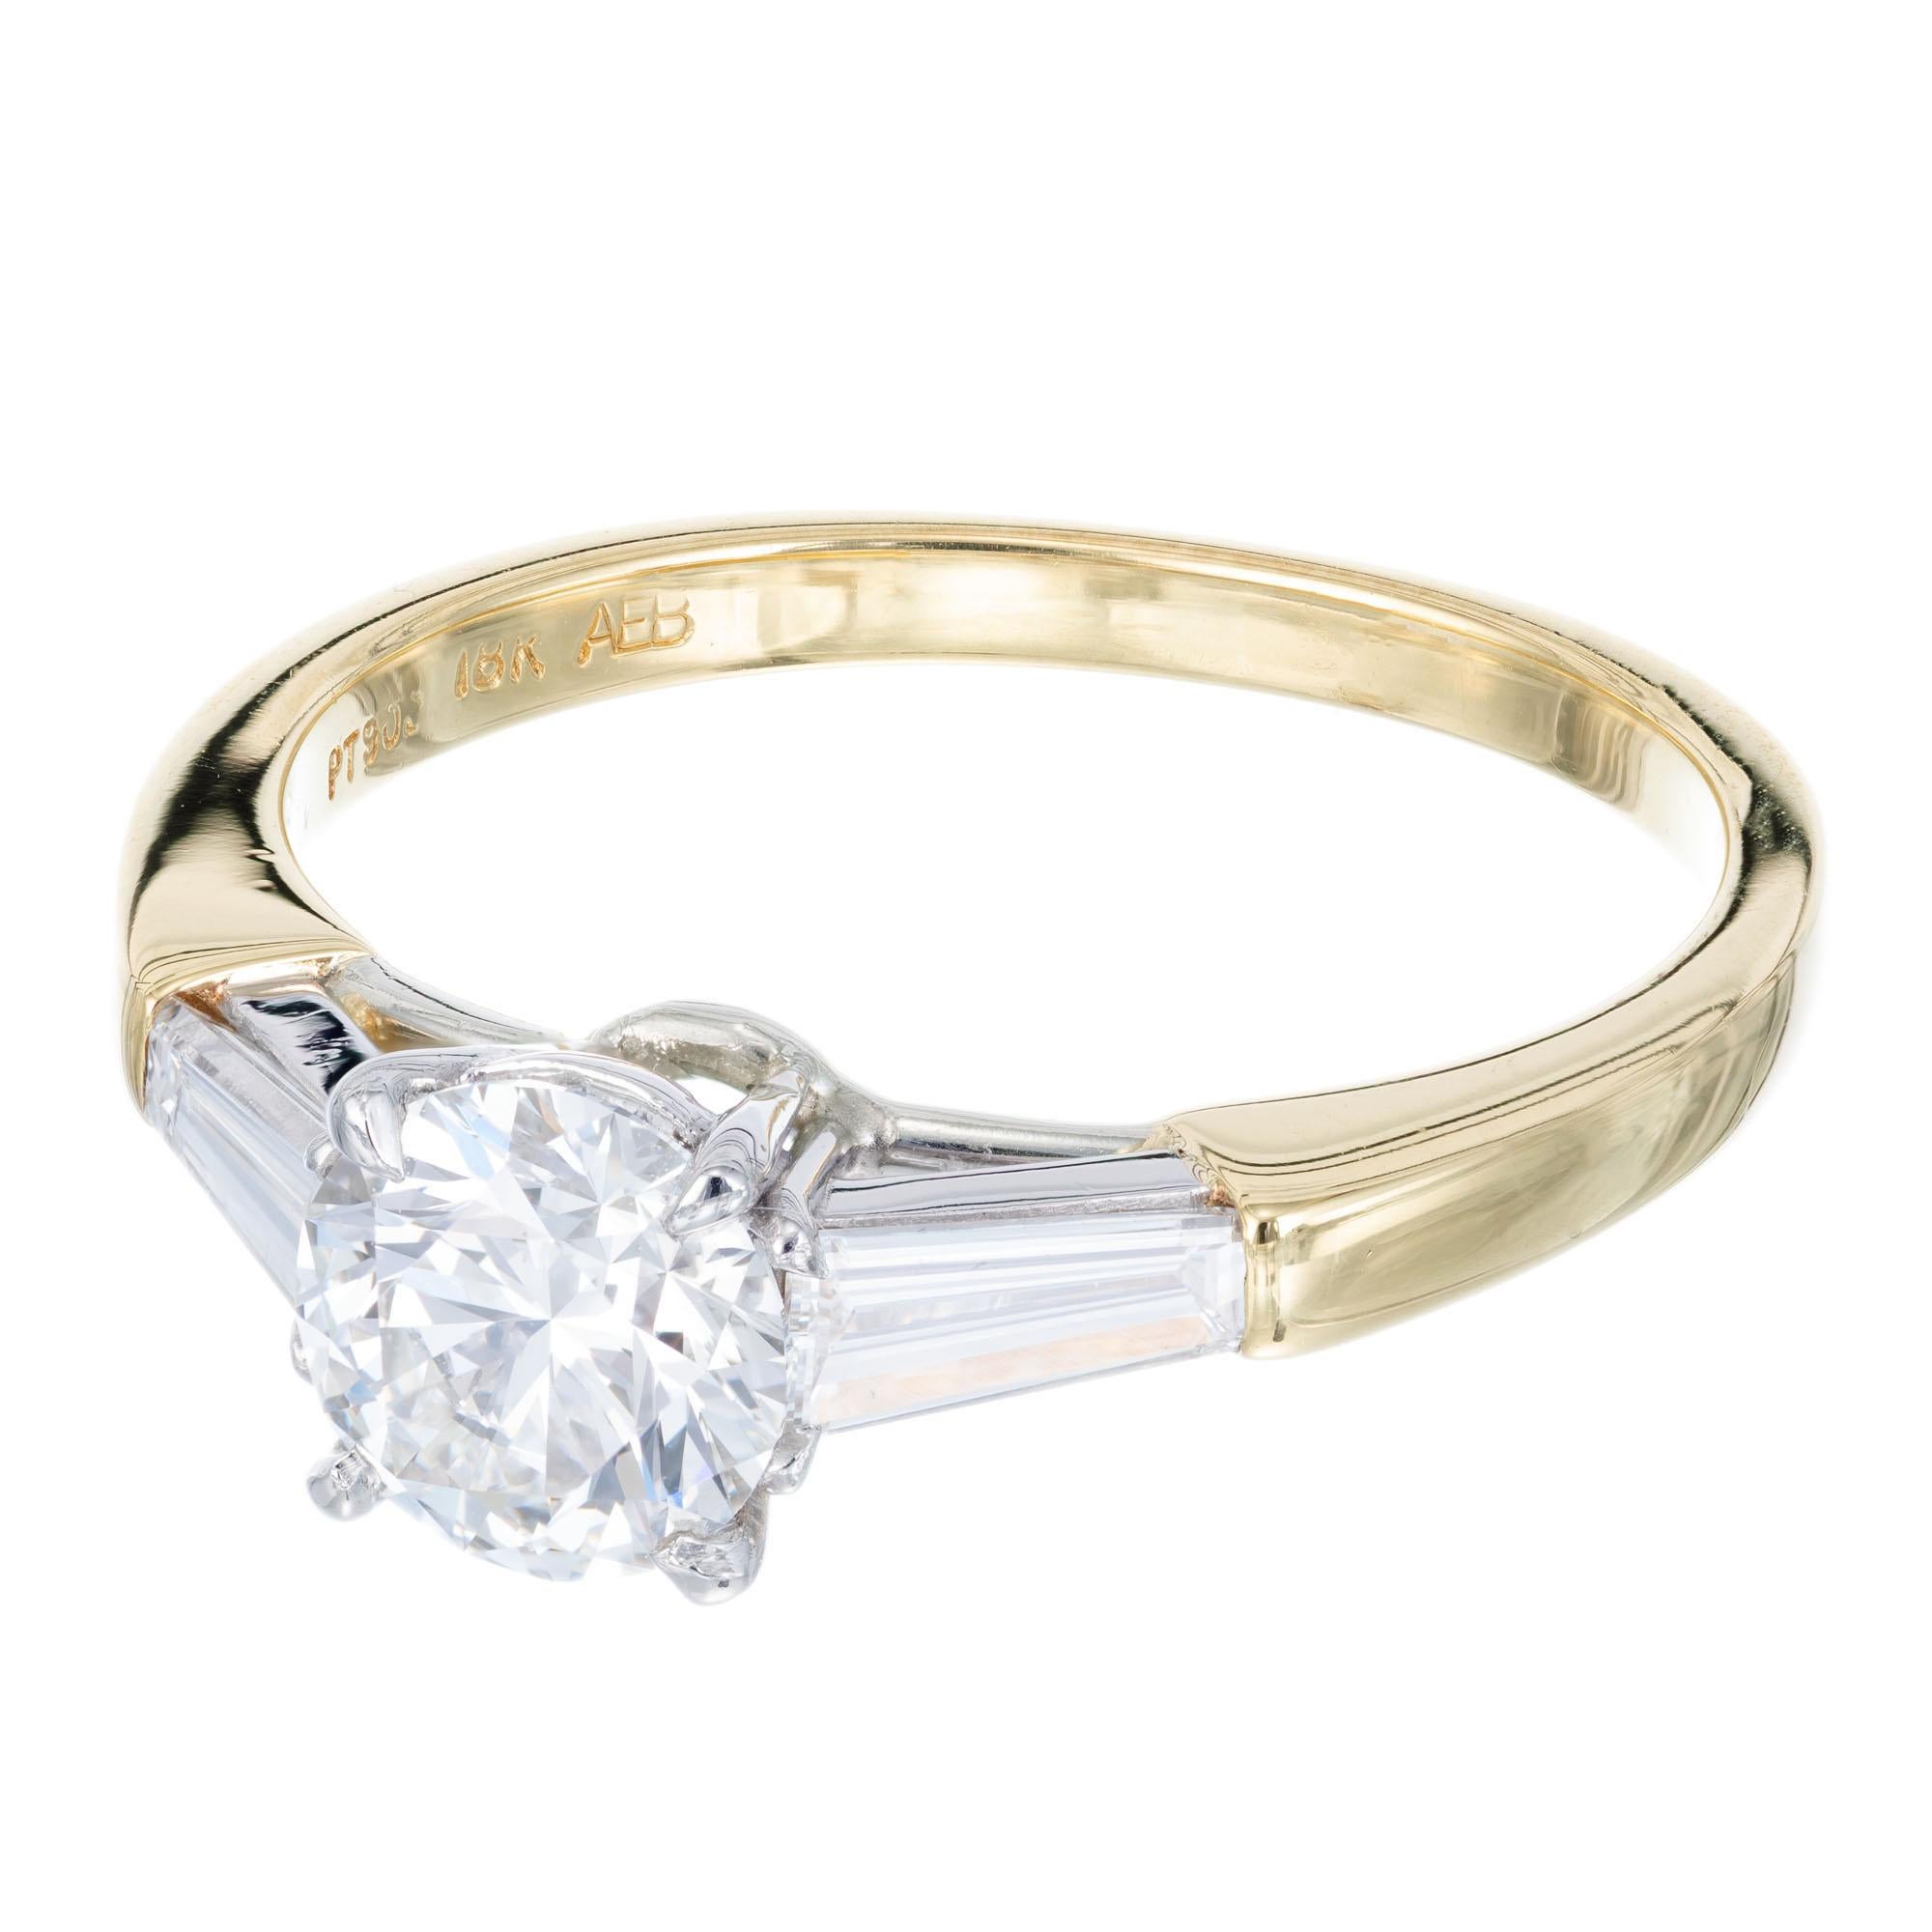 Diamond engagement ring. Platinum and 18k yellow gold three-stone setting with a GIA certified round center diamond and two tapered baguette side diamonds. 

Ideal cut diamond, approx. total weight .90cts, and 6.18 x 6.24 x 3.85 mm, F, VVS1, Depth: